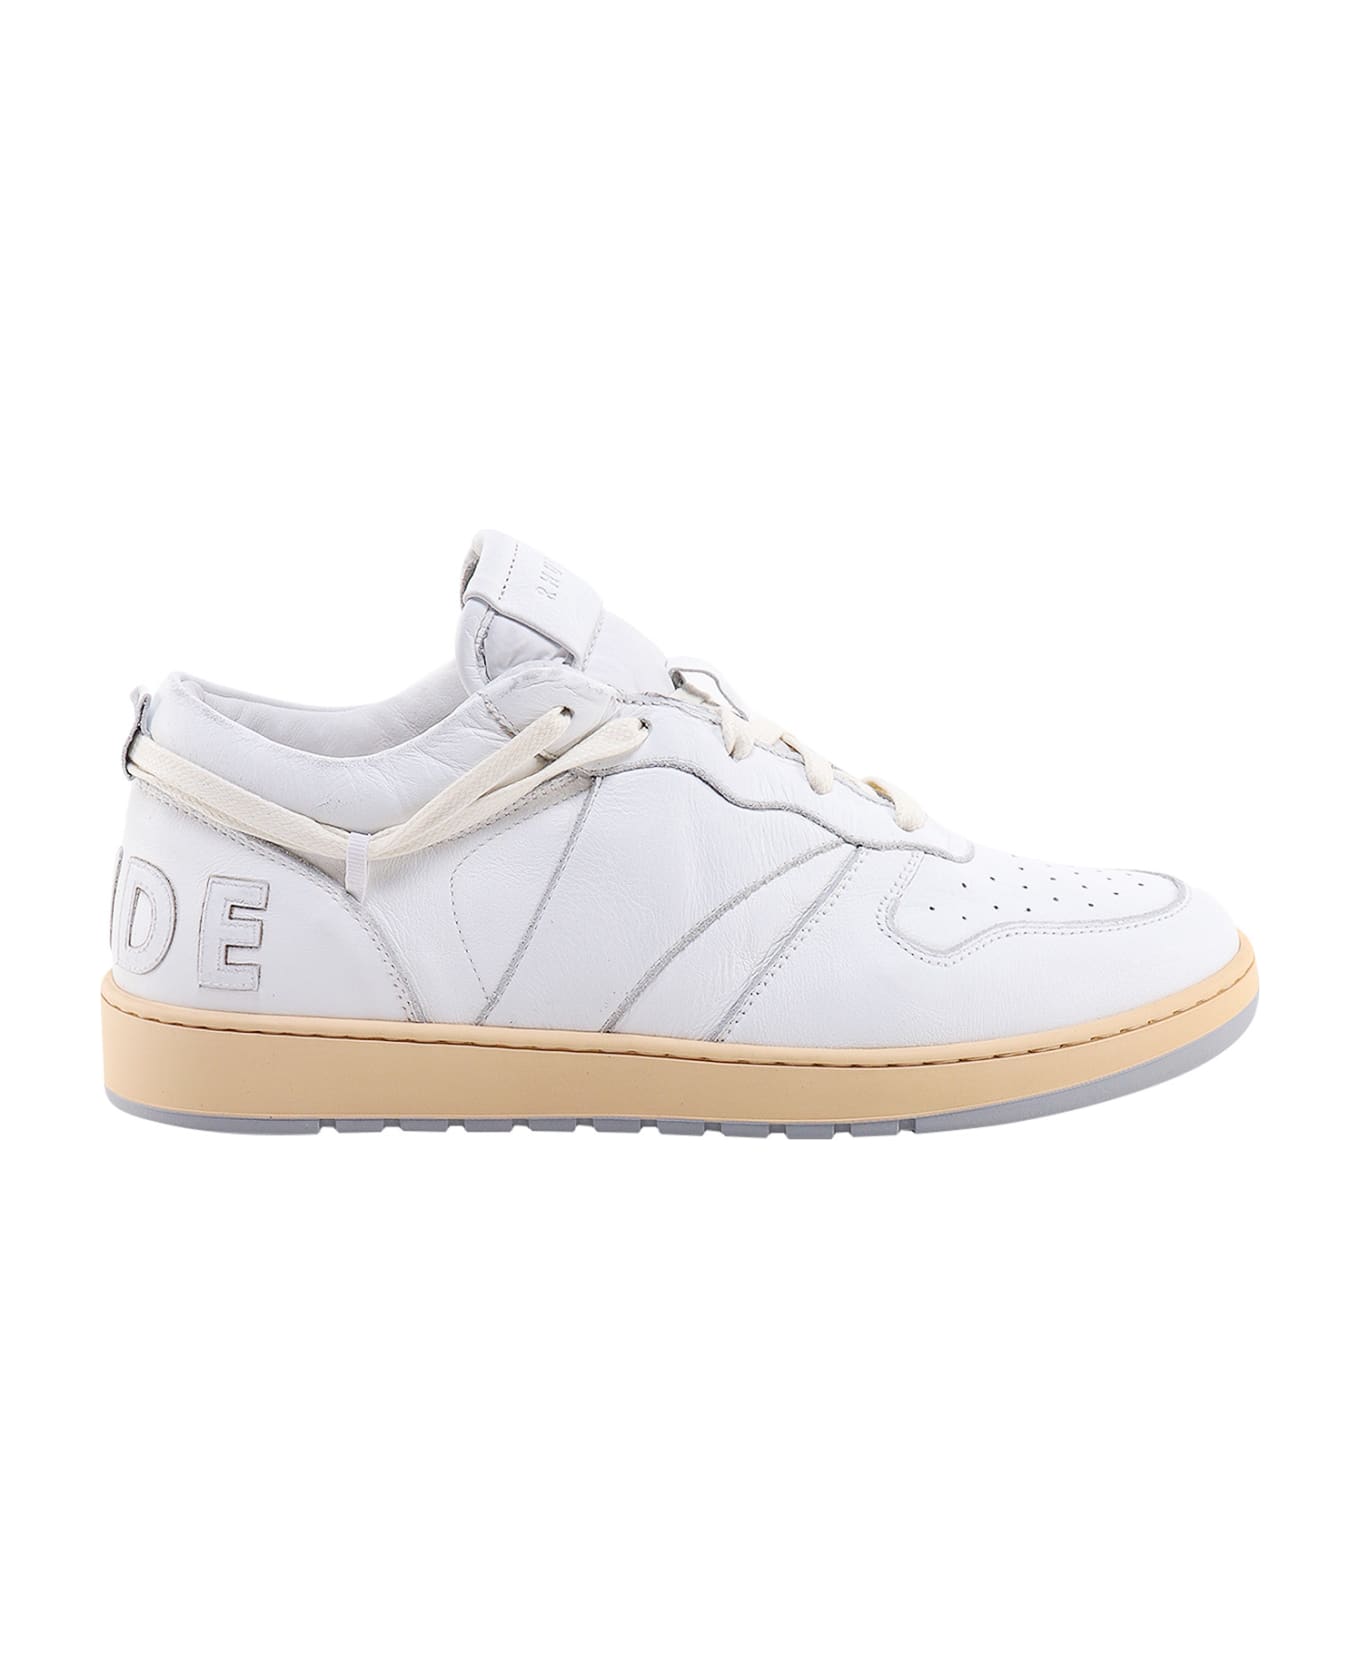 Rhude Rhecess-low Sneakers - White